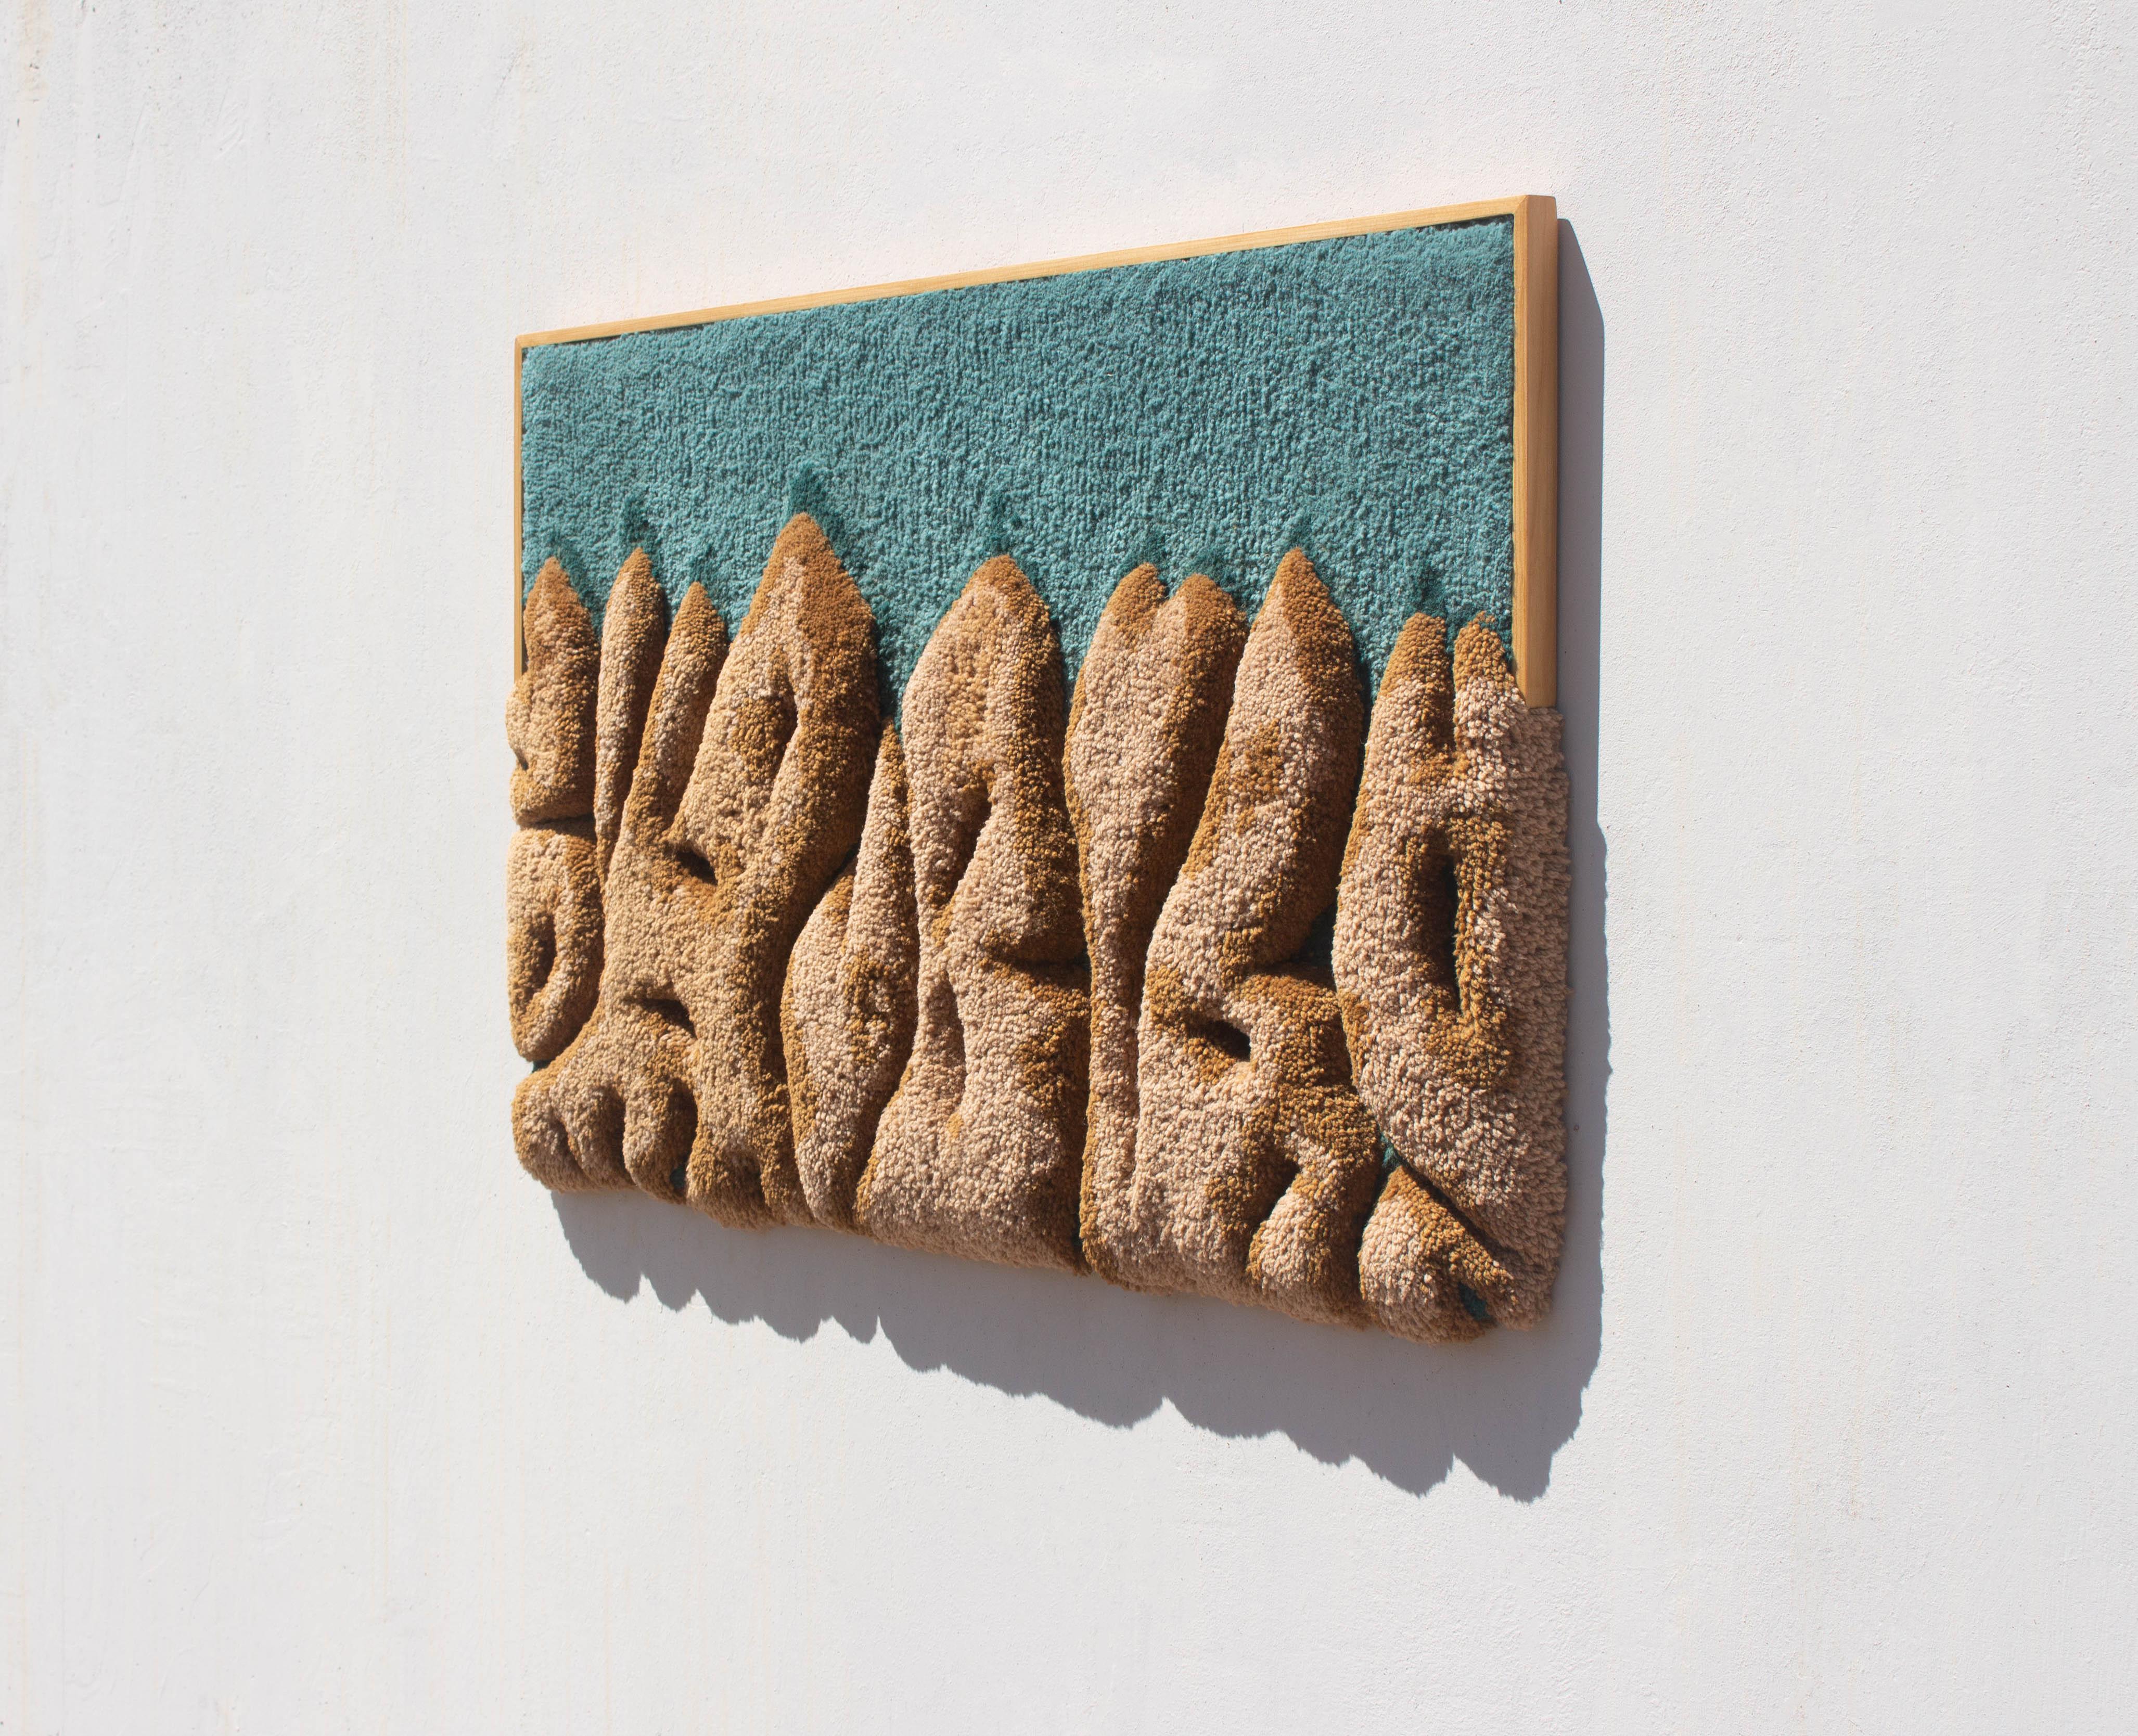 DUNAS TAPESTRY is a one of a kind contemporary artwork representing a beach dune landscape. Every day the tides and the wind brings new sand textures and shapes to the beautiful portuguese beaches and dunes have a major role providing natural